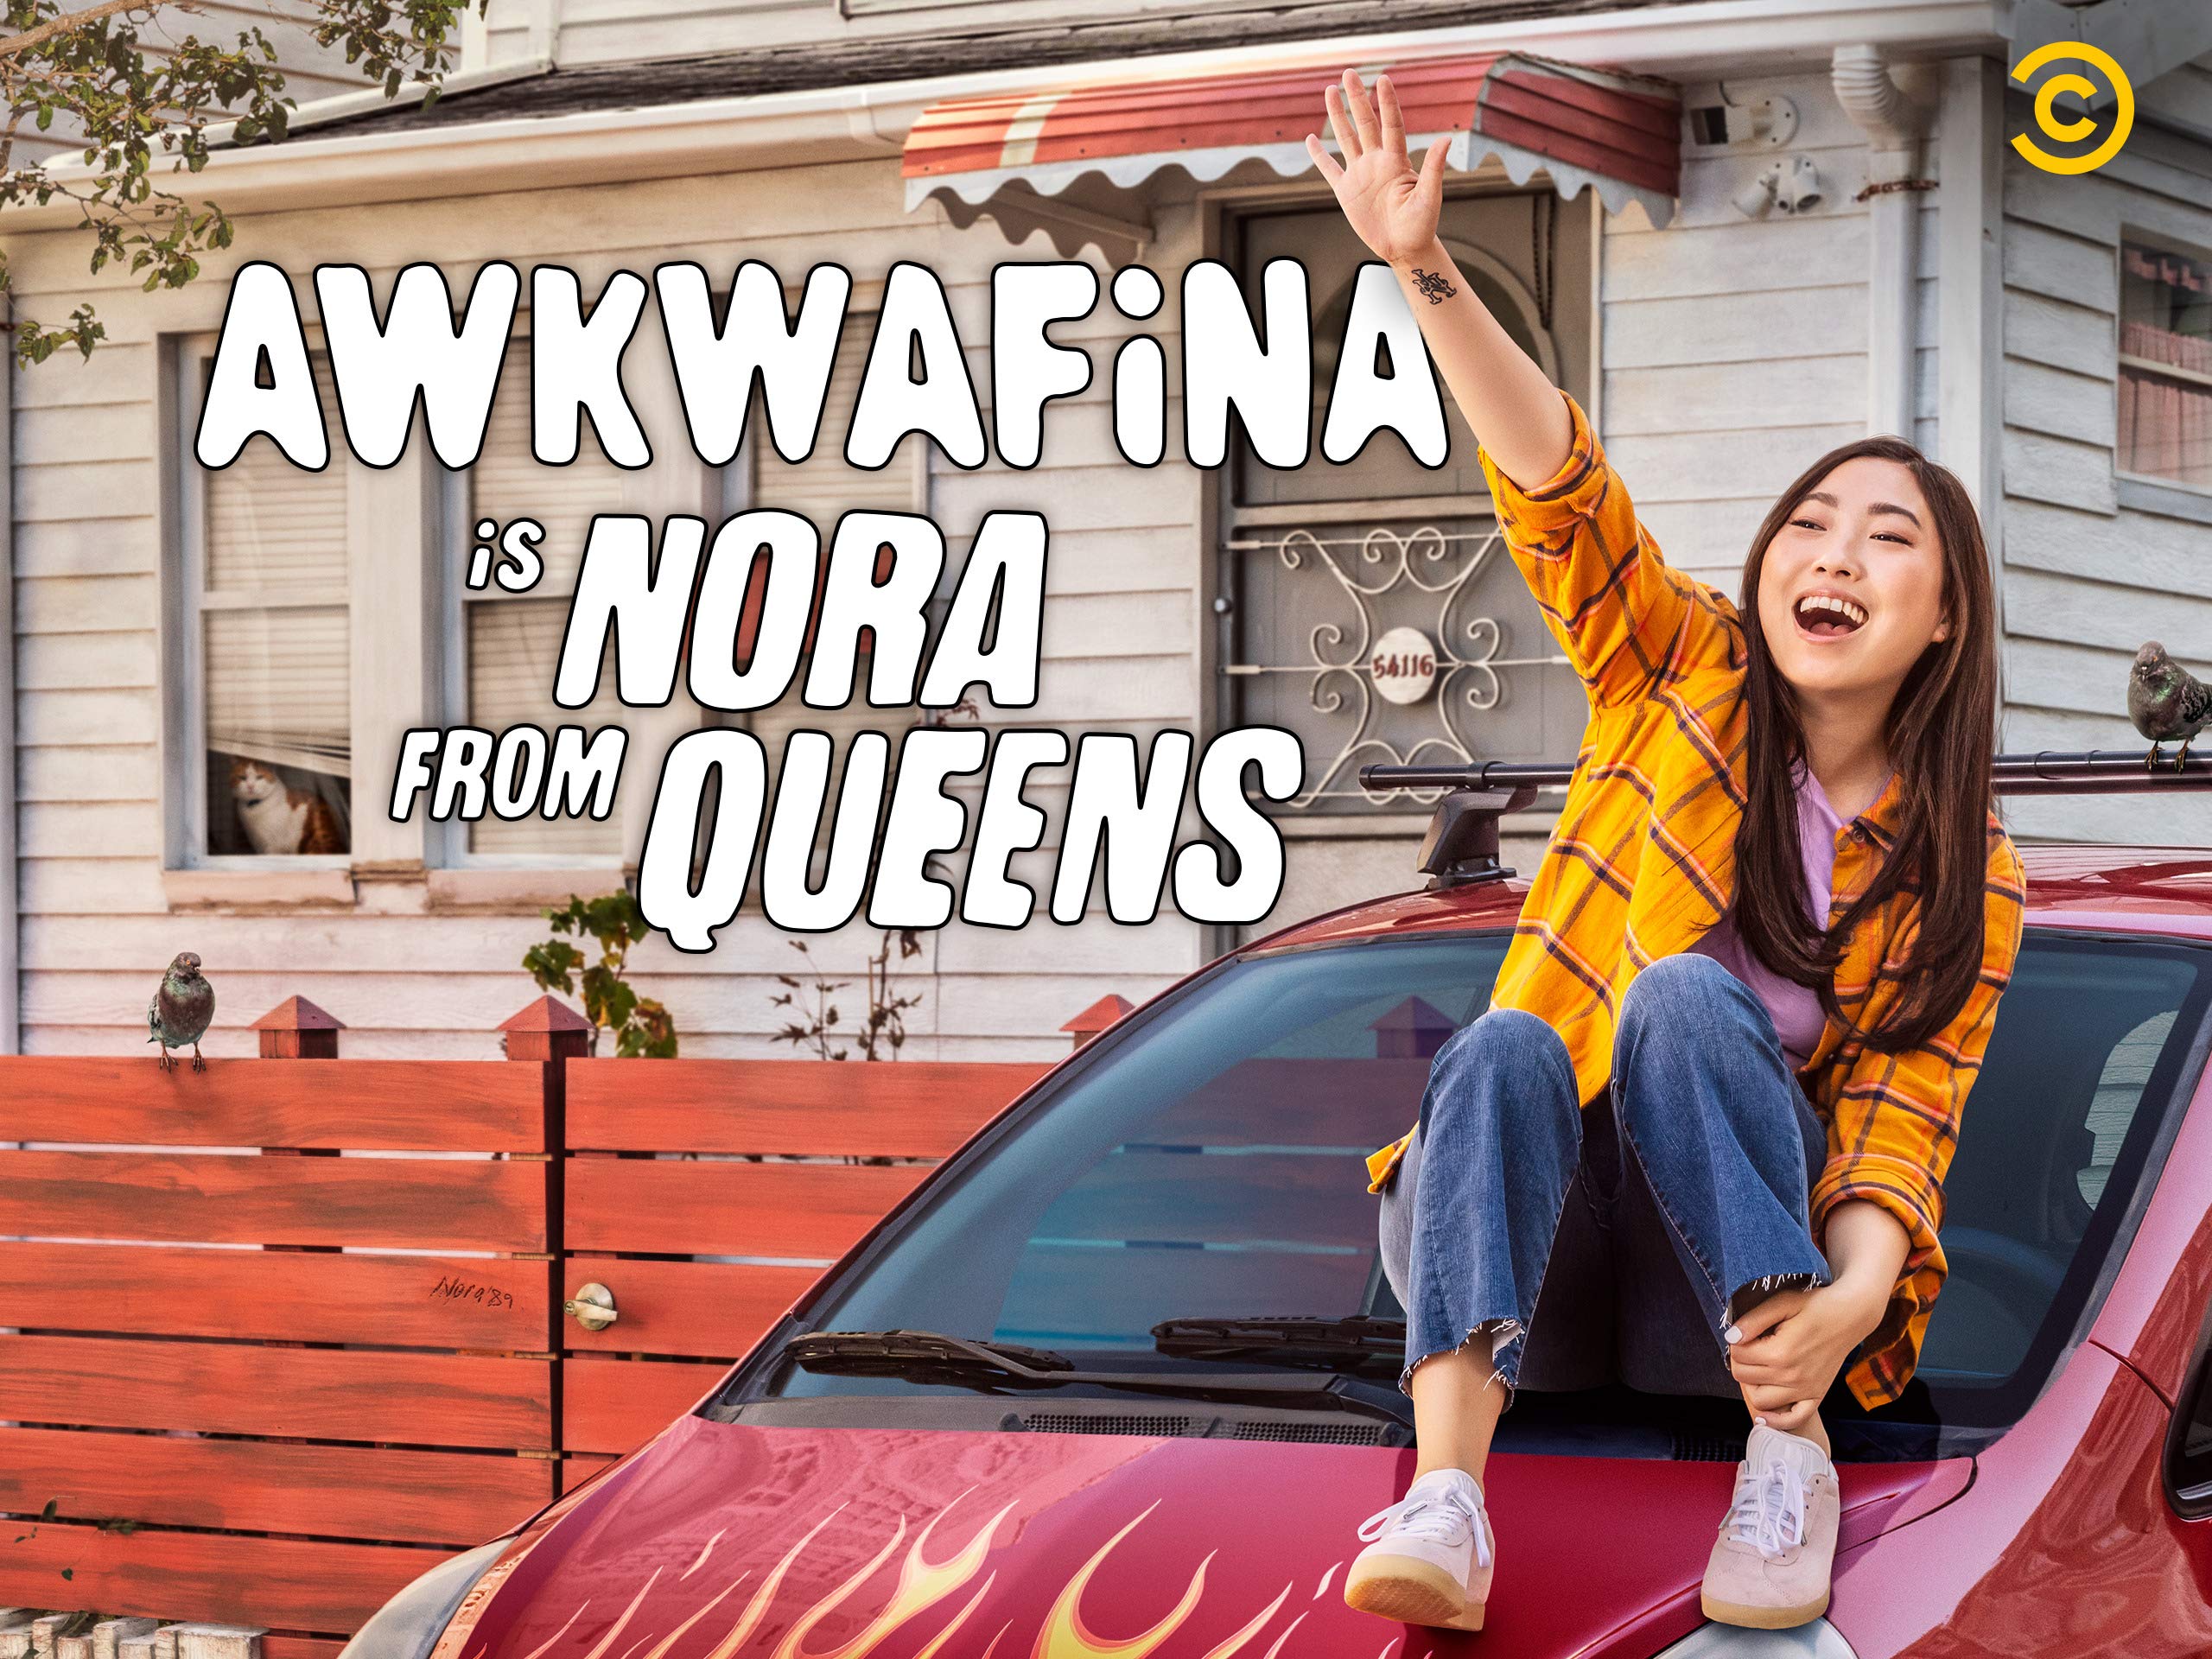 Awkwafina Is Nora from Queens Season 2